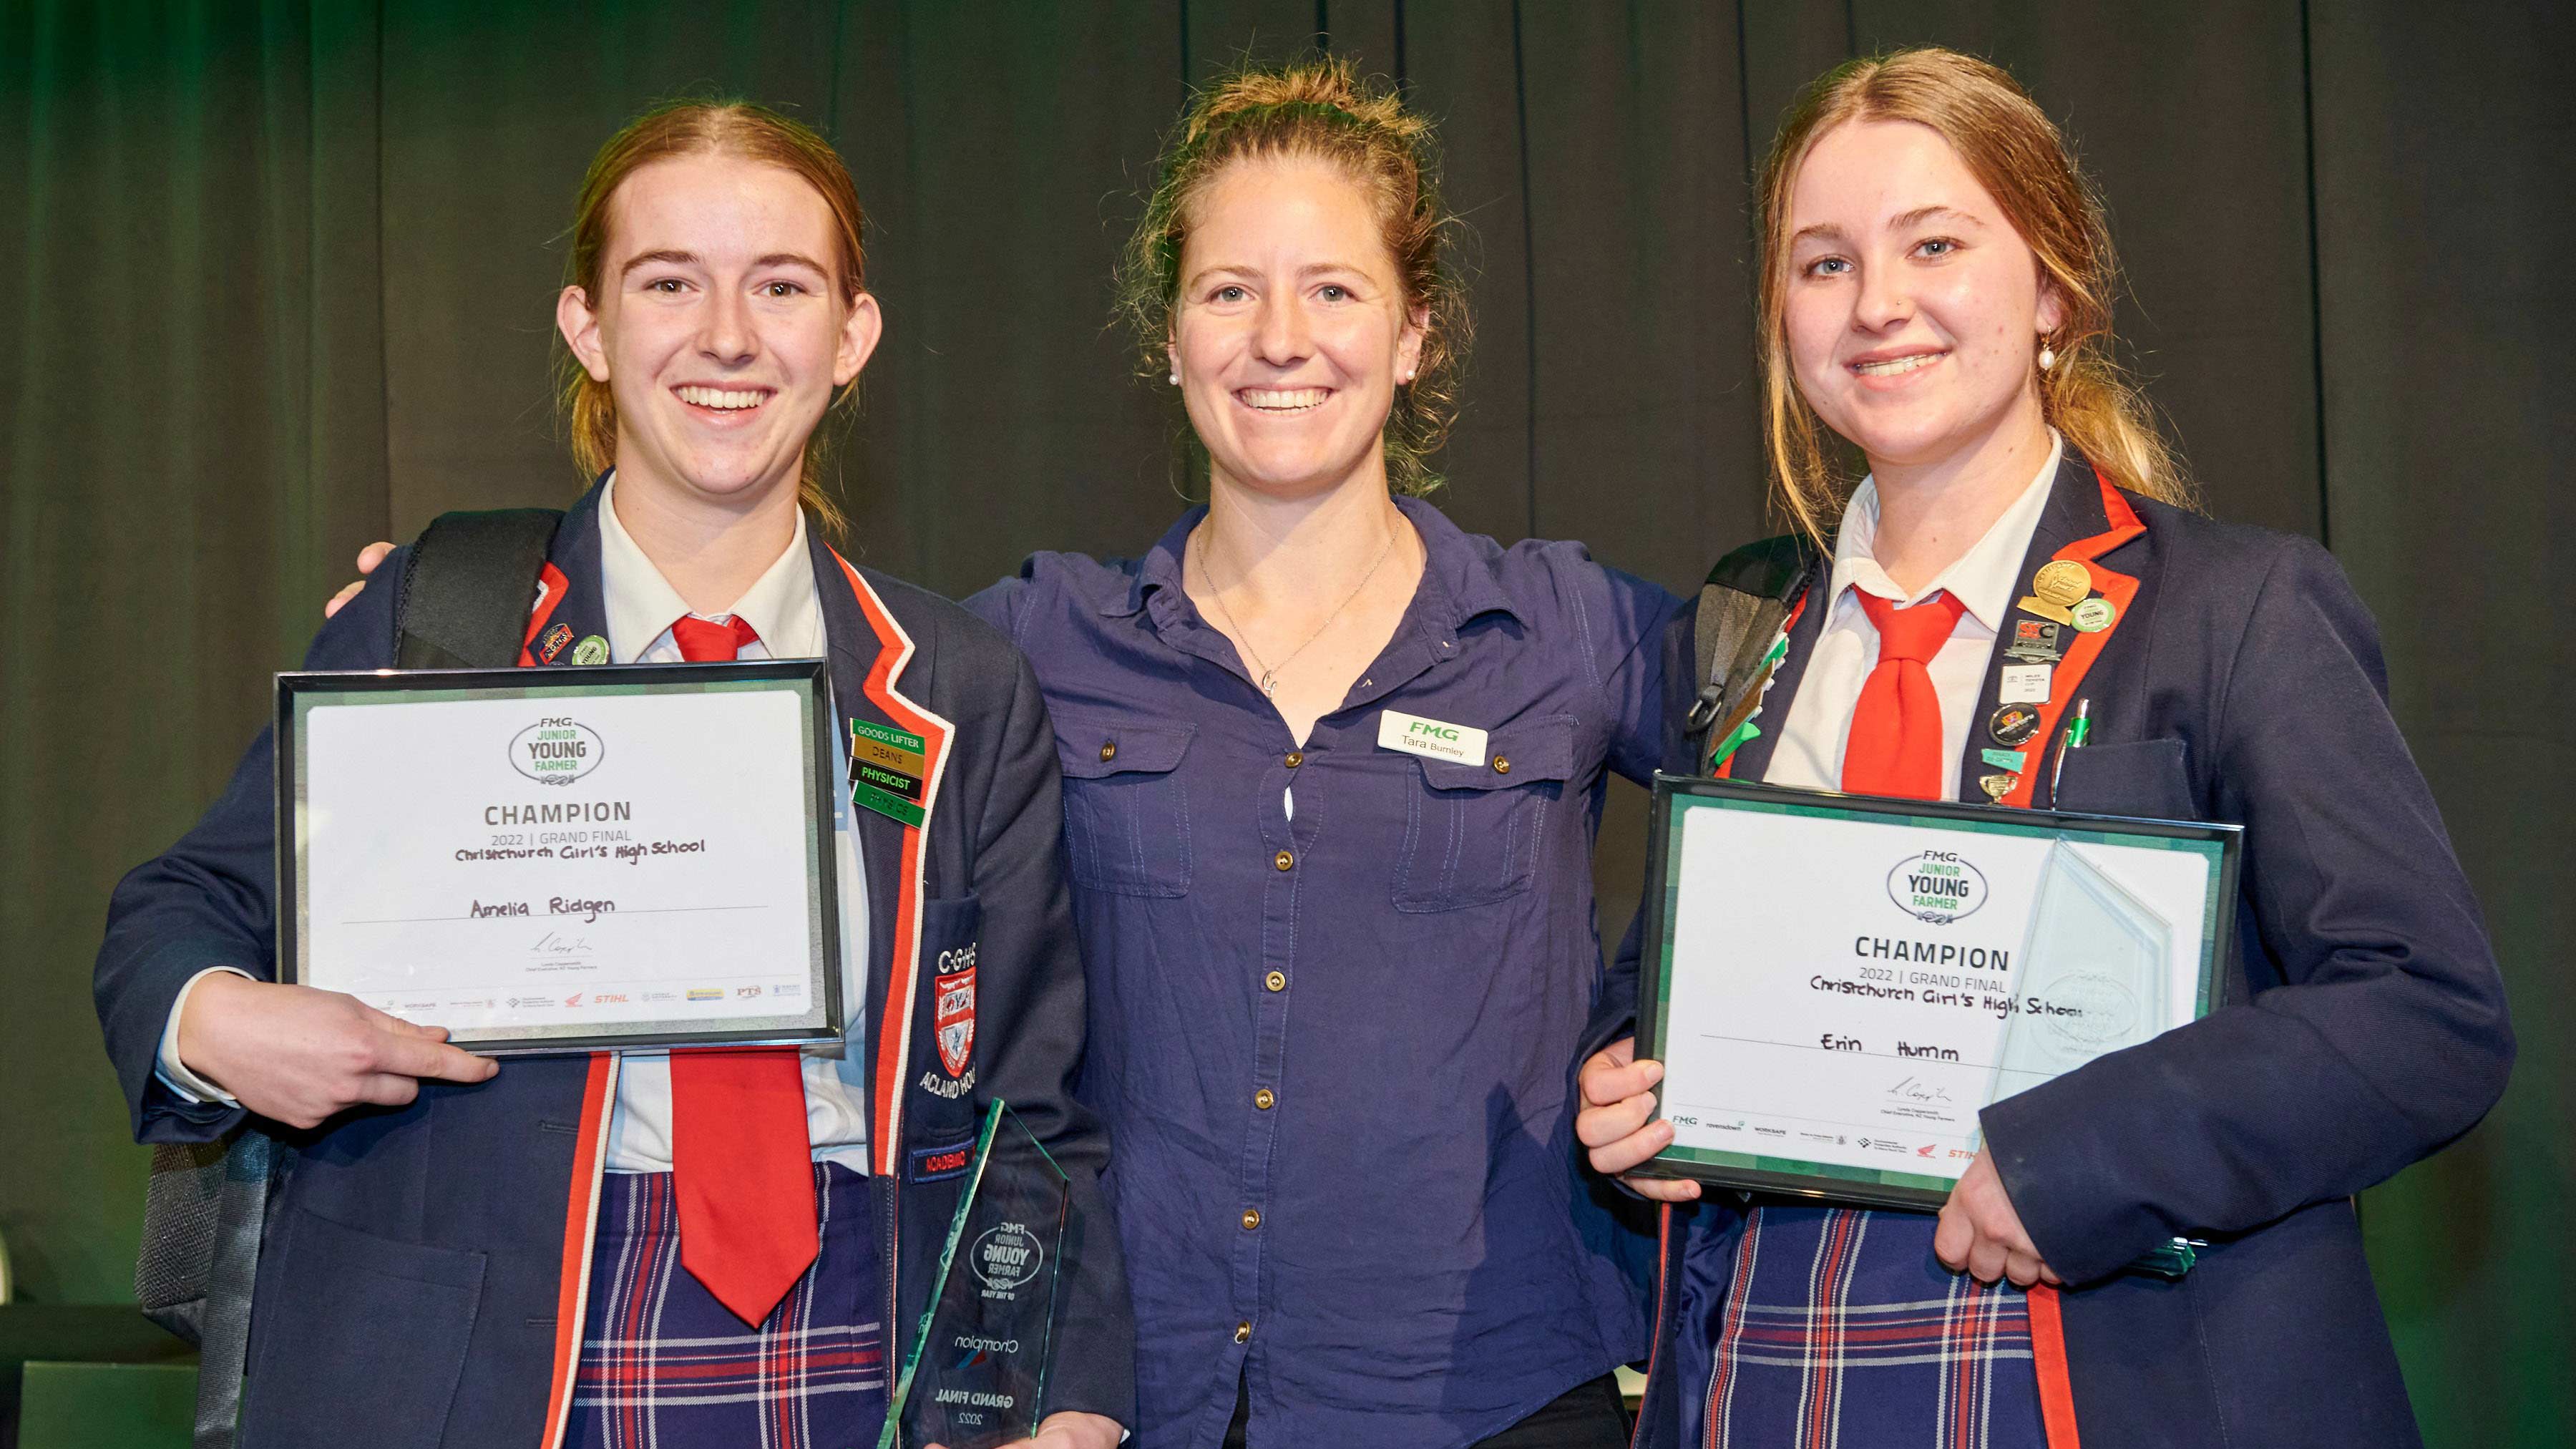 FMG Junior Young Farmer of the Year Award